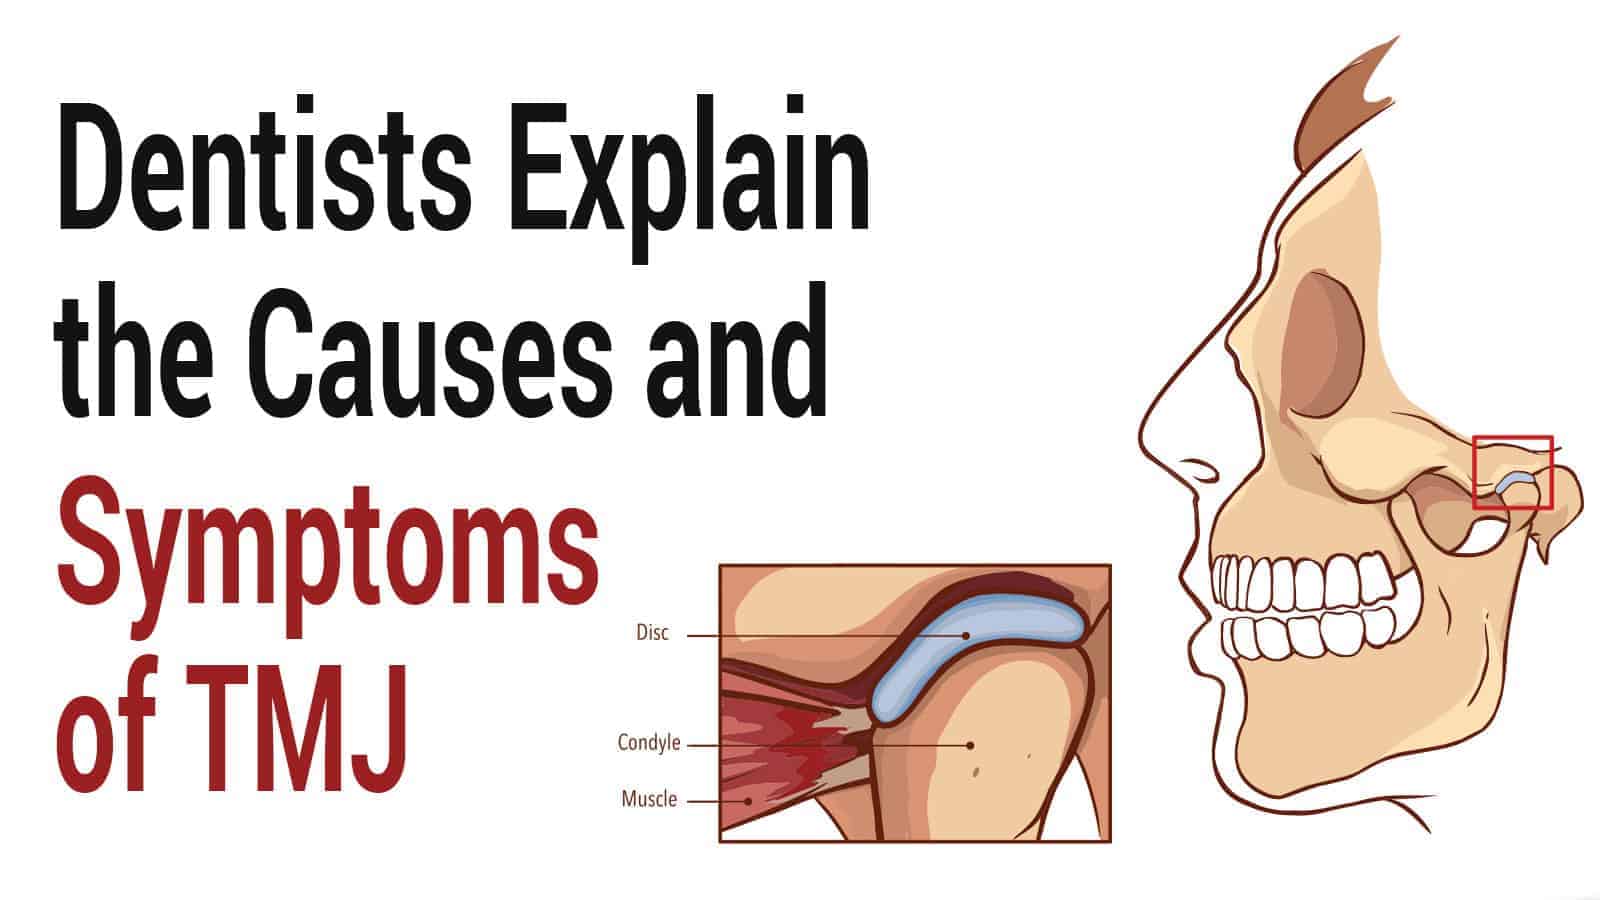 Dentists Explain the Causes and Symptoms of TMJ